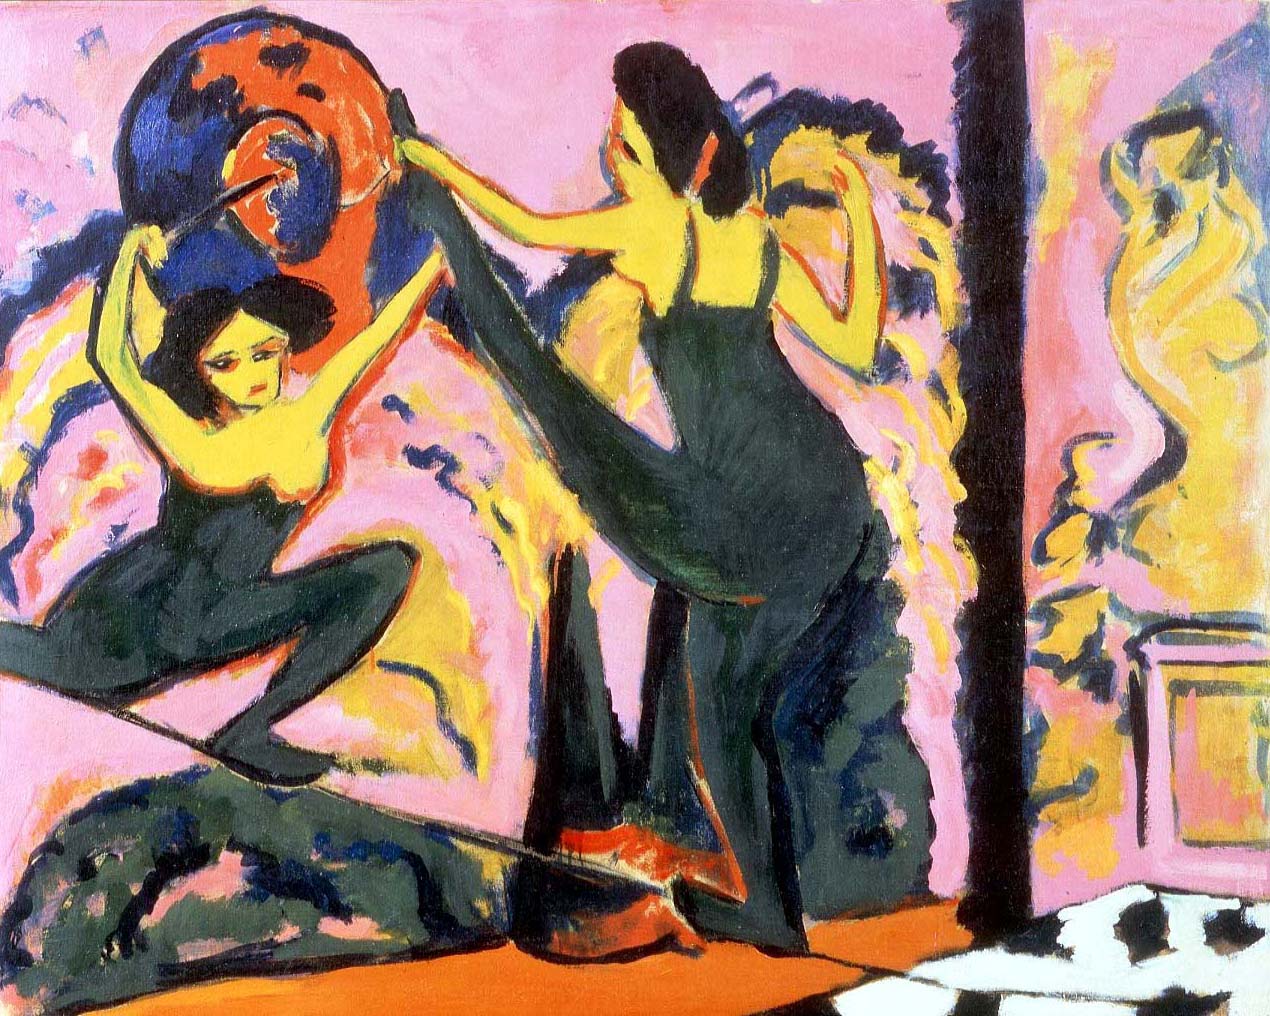 File:Tightrope Walk by Ernst Ludwig Kirchner.jpg - Wikimedia Commons